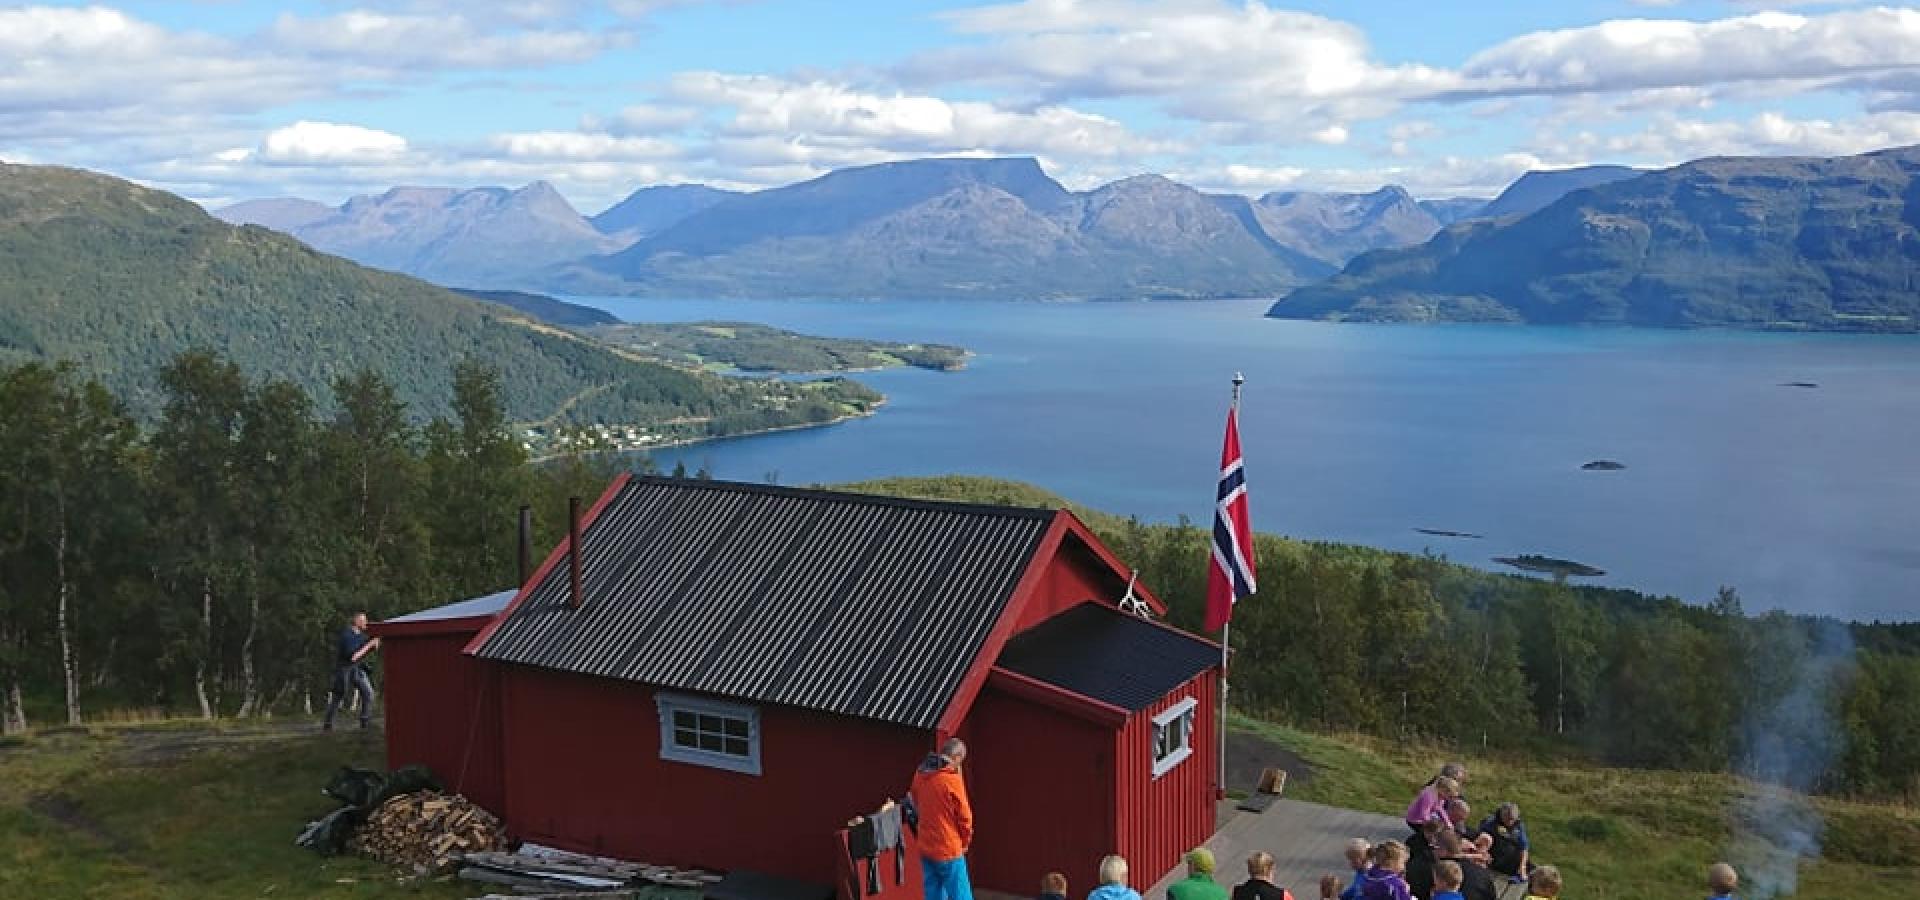 Red cabin in the mountains with views towards the fjord and mountains